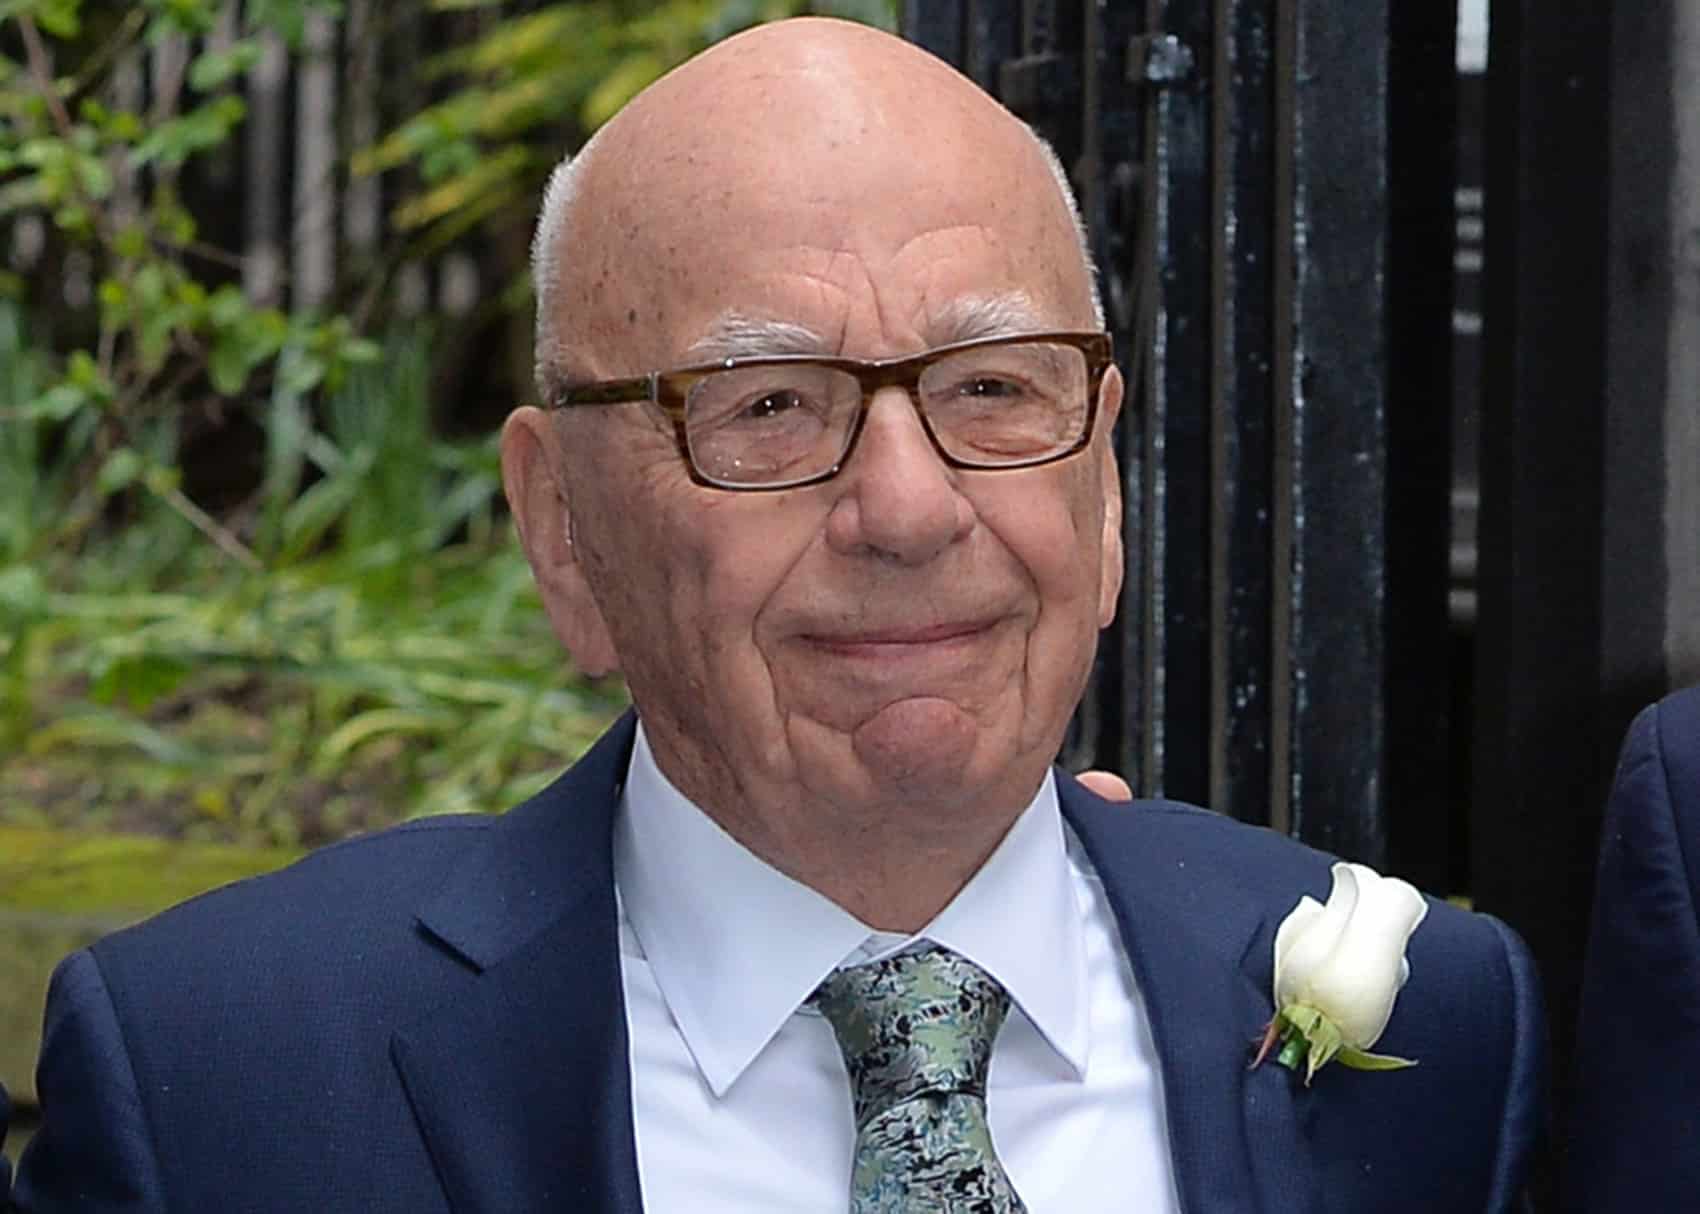 Rupert Murdoch believed to be dating Roman Abramovich’s former mother-in-law